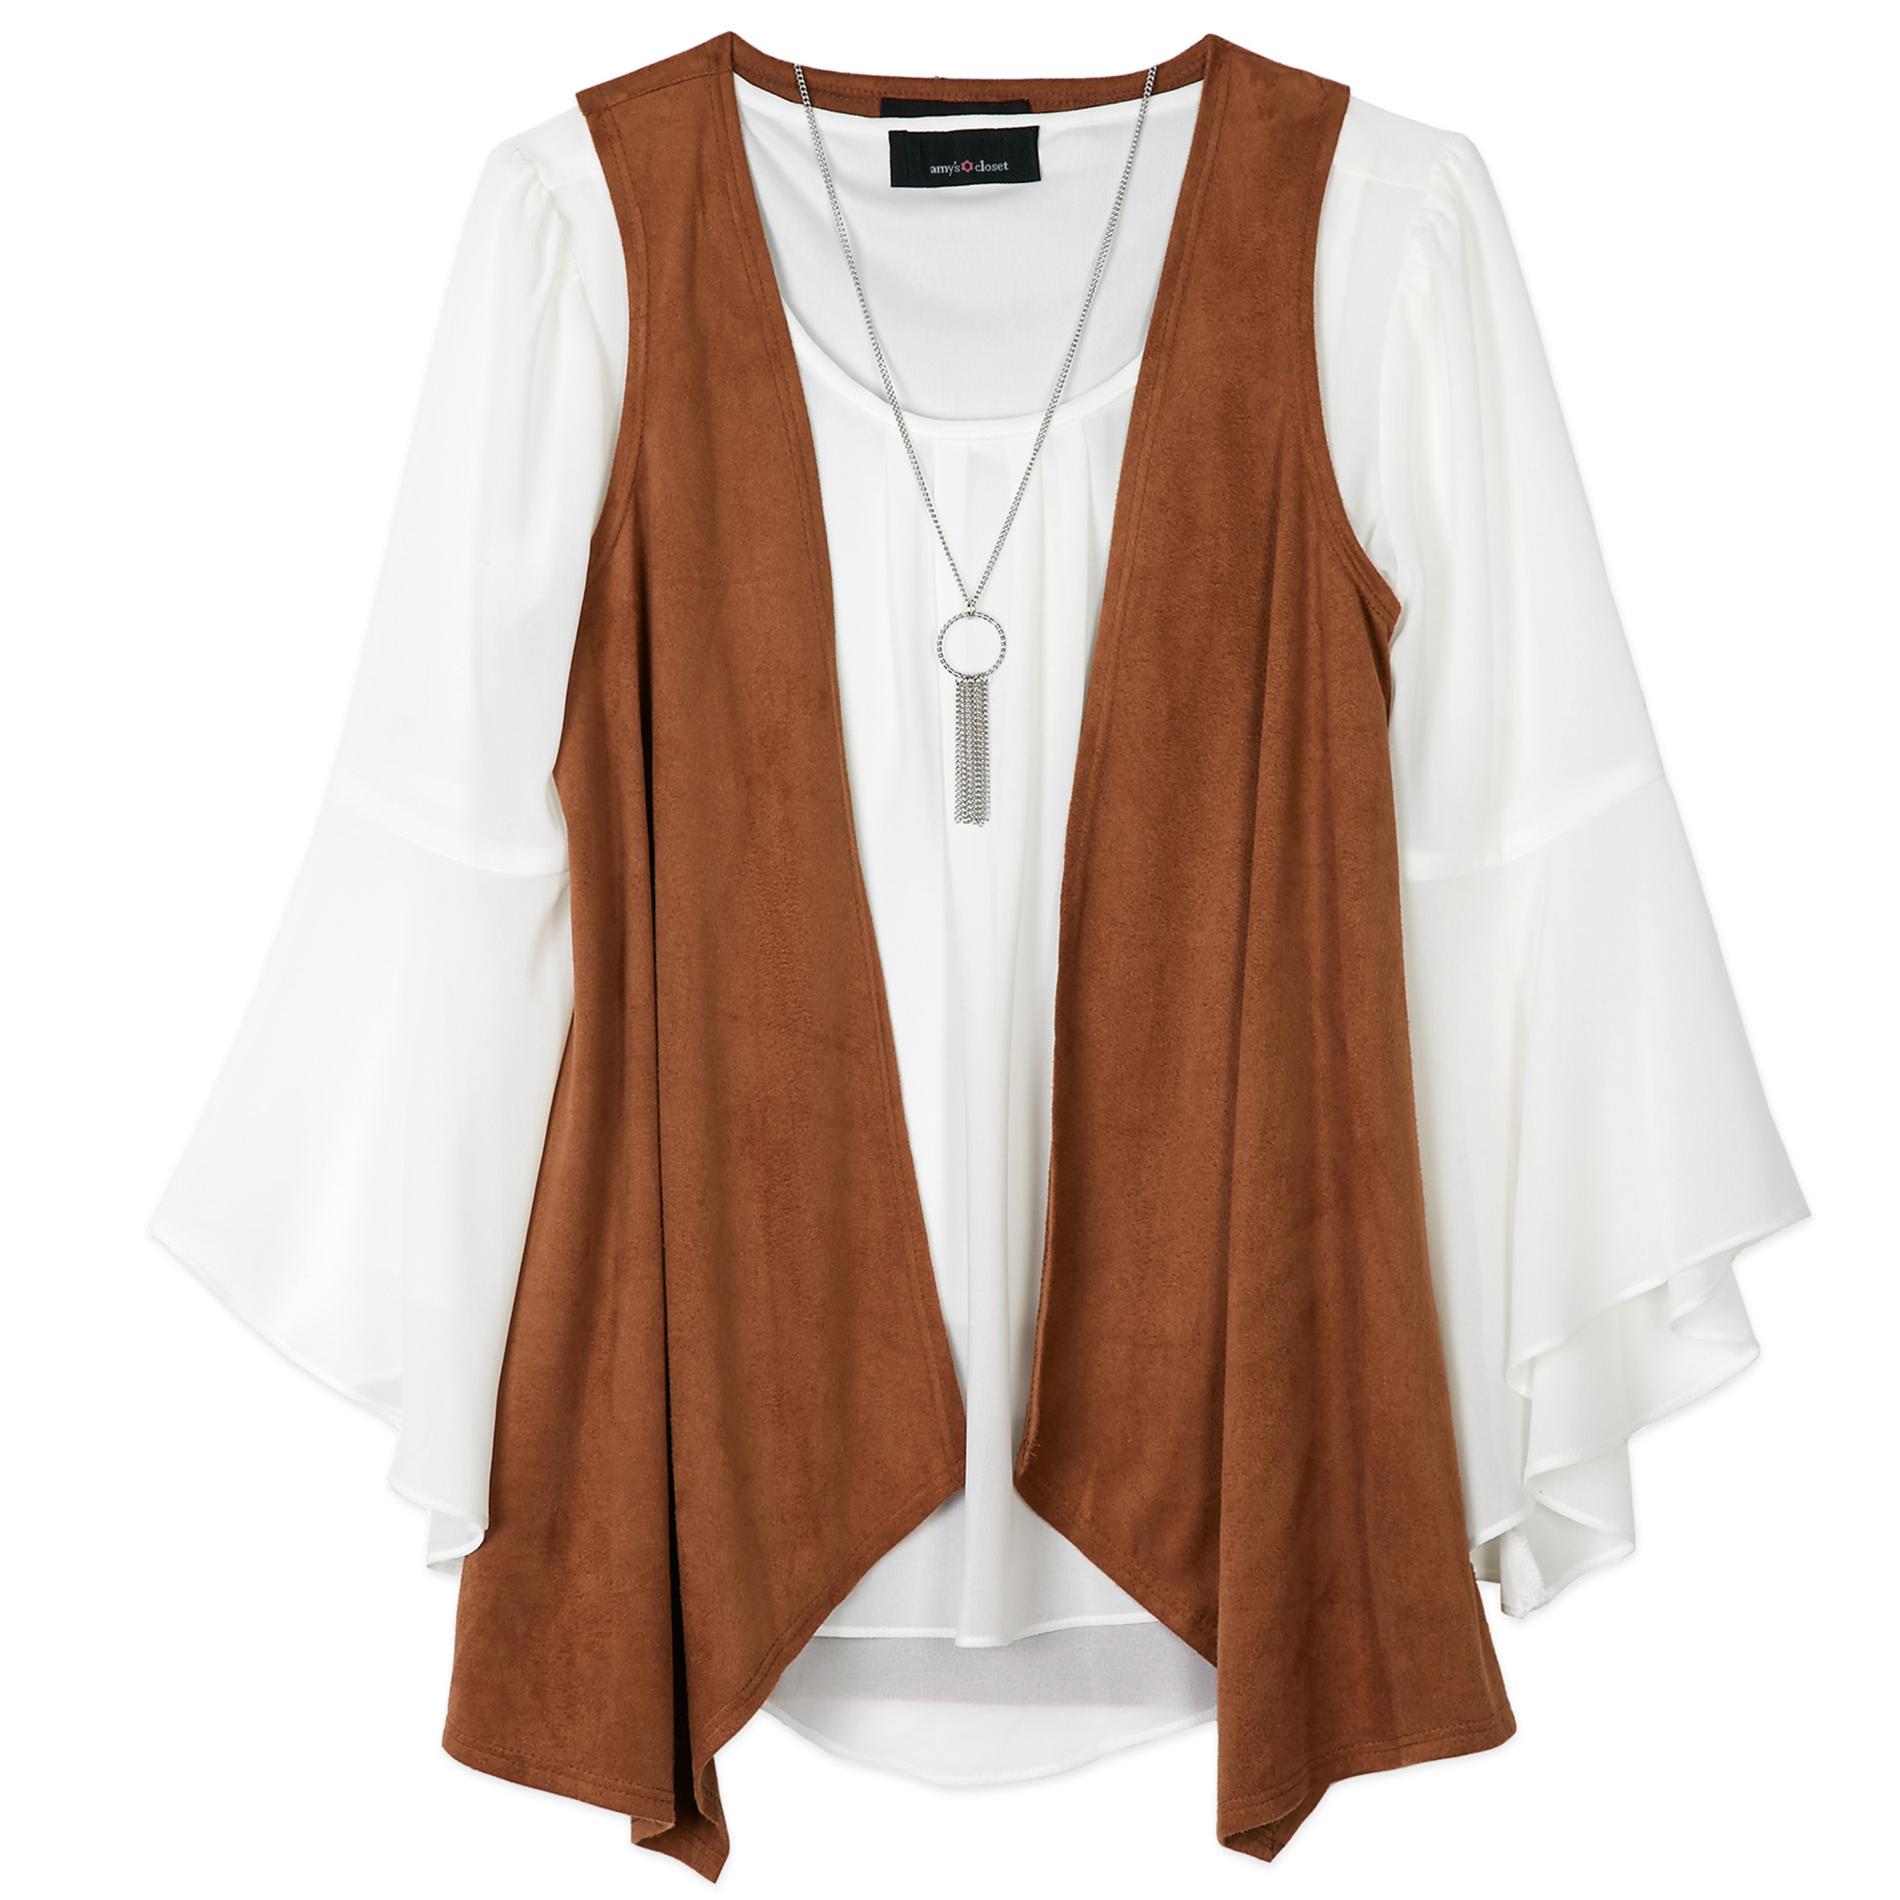 Amy's Closet Girls' Layered-Look Top & Necklace